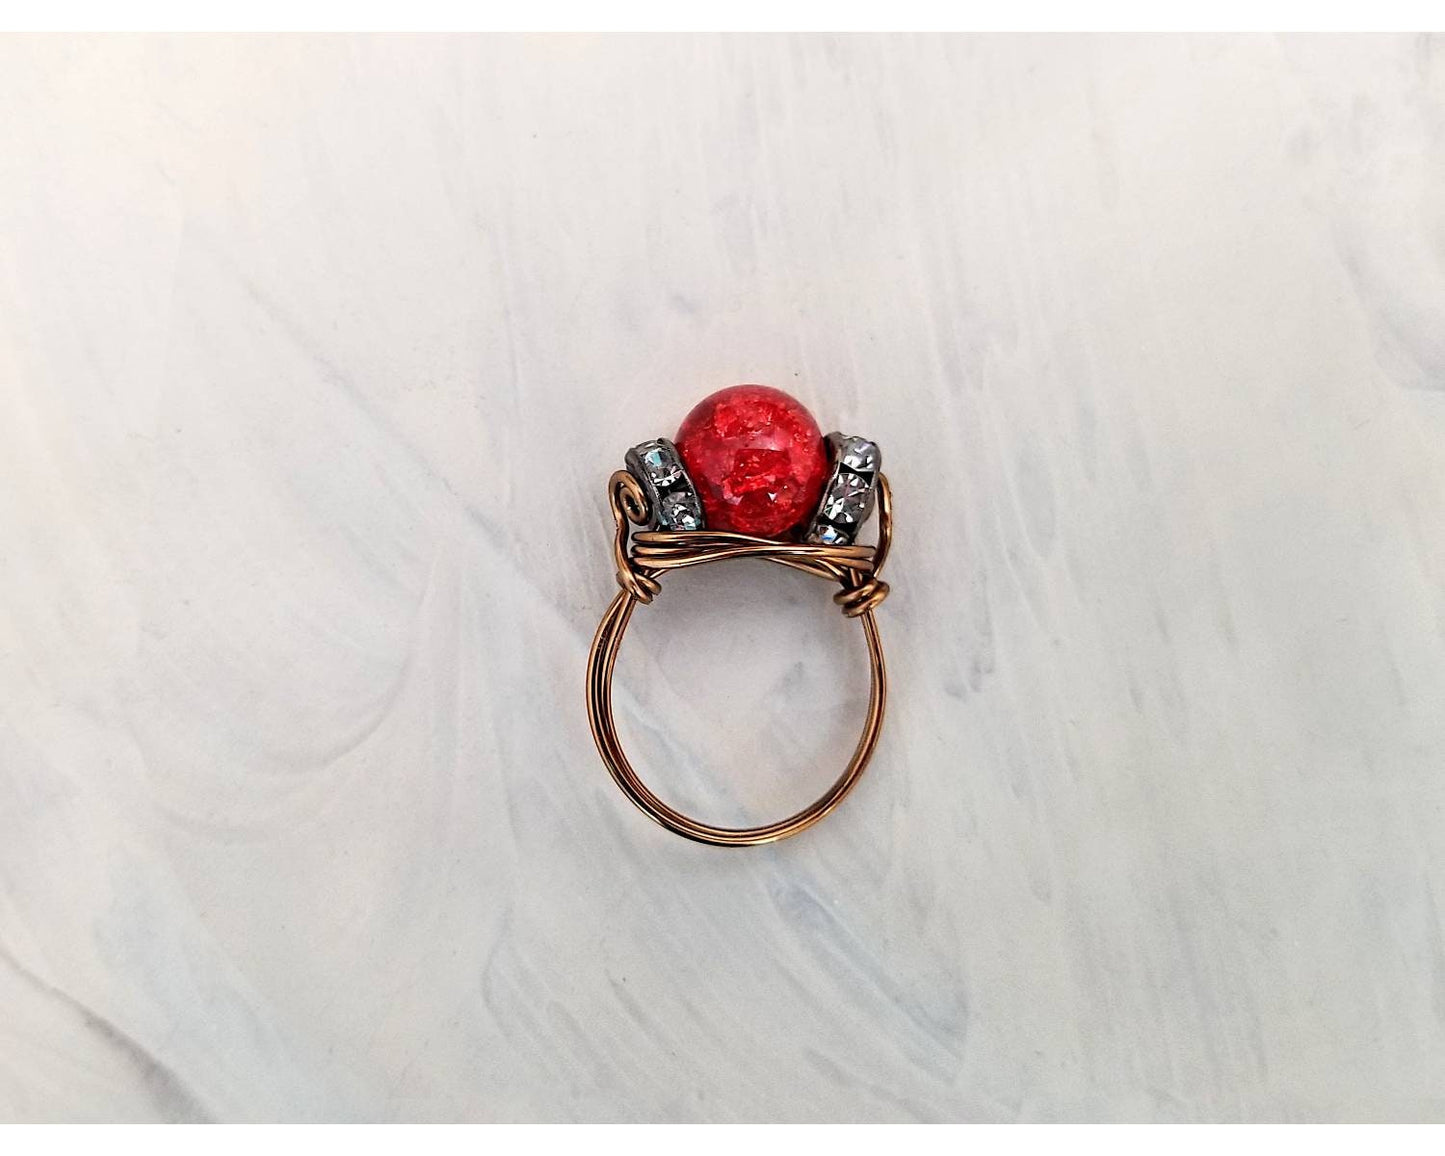 Wire Ring in Red-Orange Crackle with Rhinestones, Fairy Tale, Renaissance, Medieval, Choice of Colors and Metals